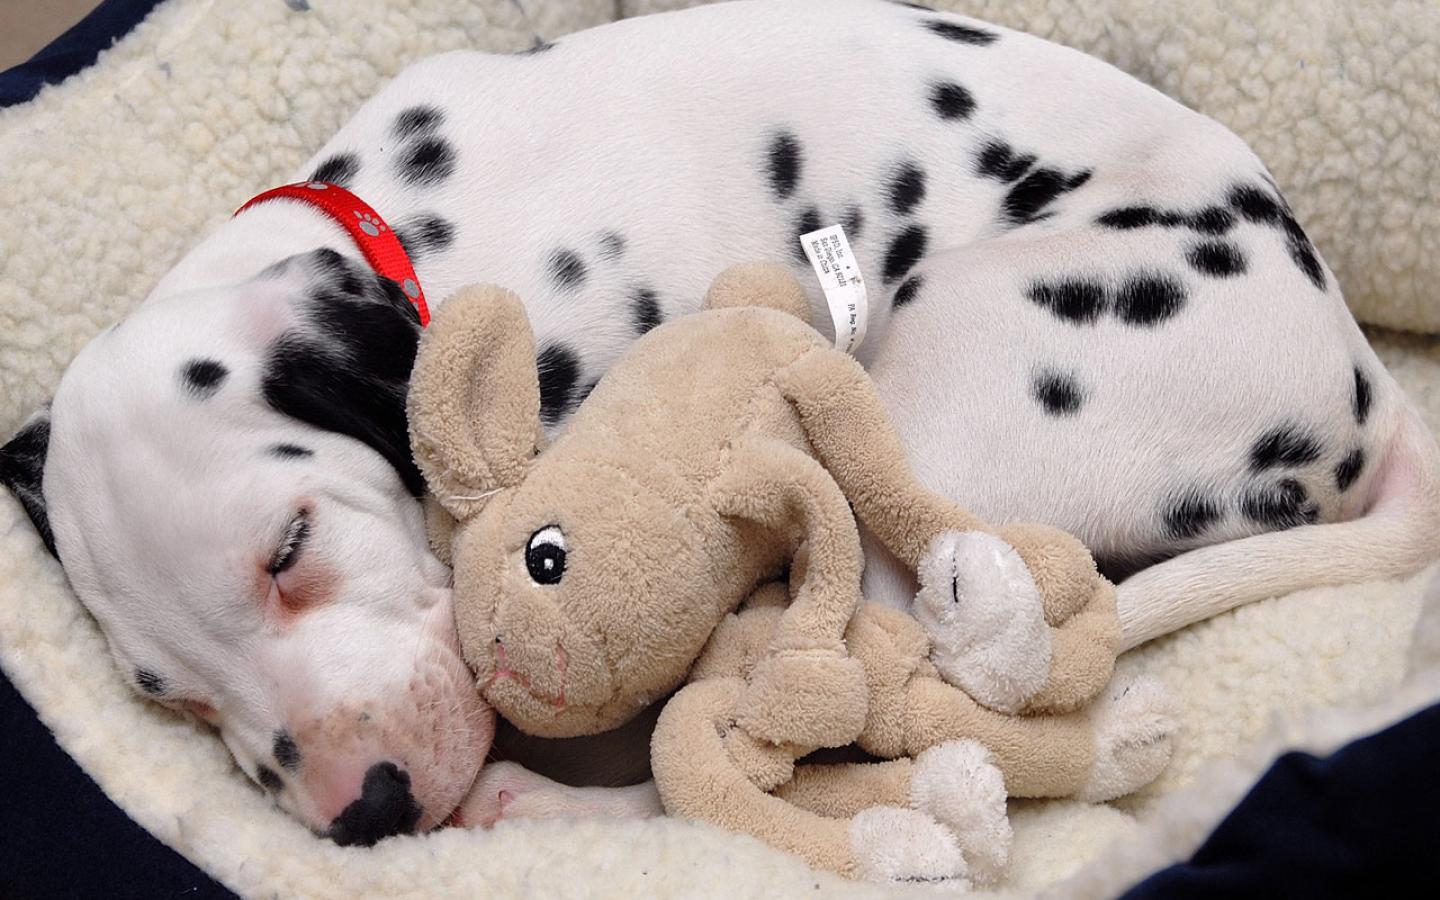 Dalmation - Puppy with Favorite Toy Wallpaper #3 1440 x 900 